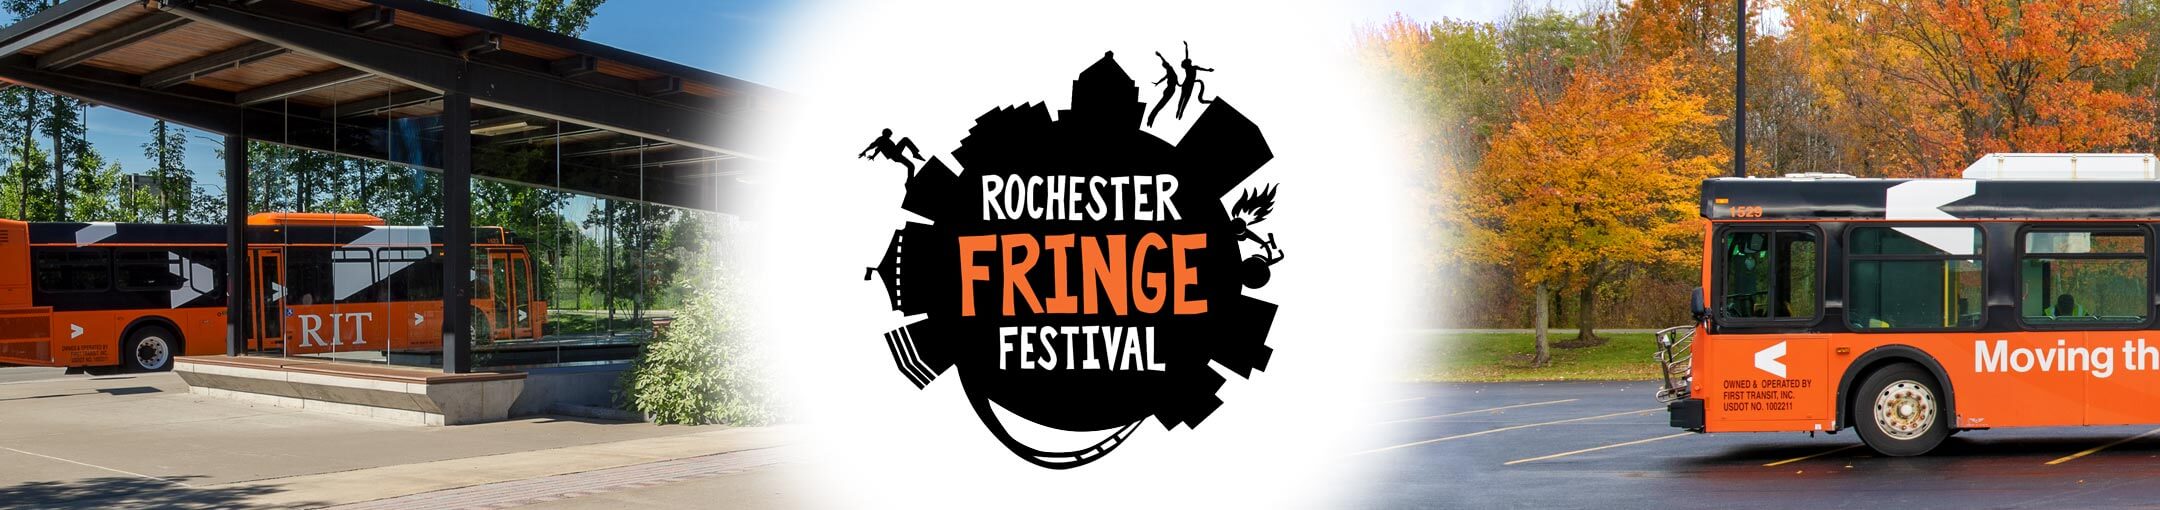 Rochester Fringe Fest logo with orange RIT buses pictured to the left and right.